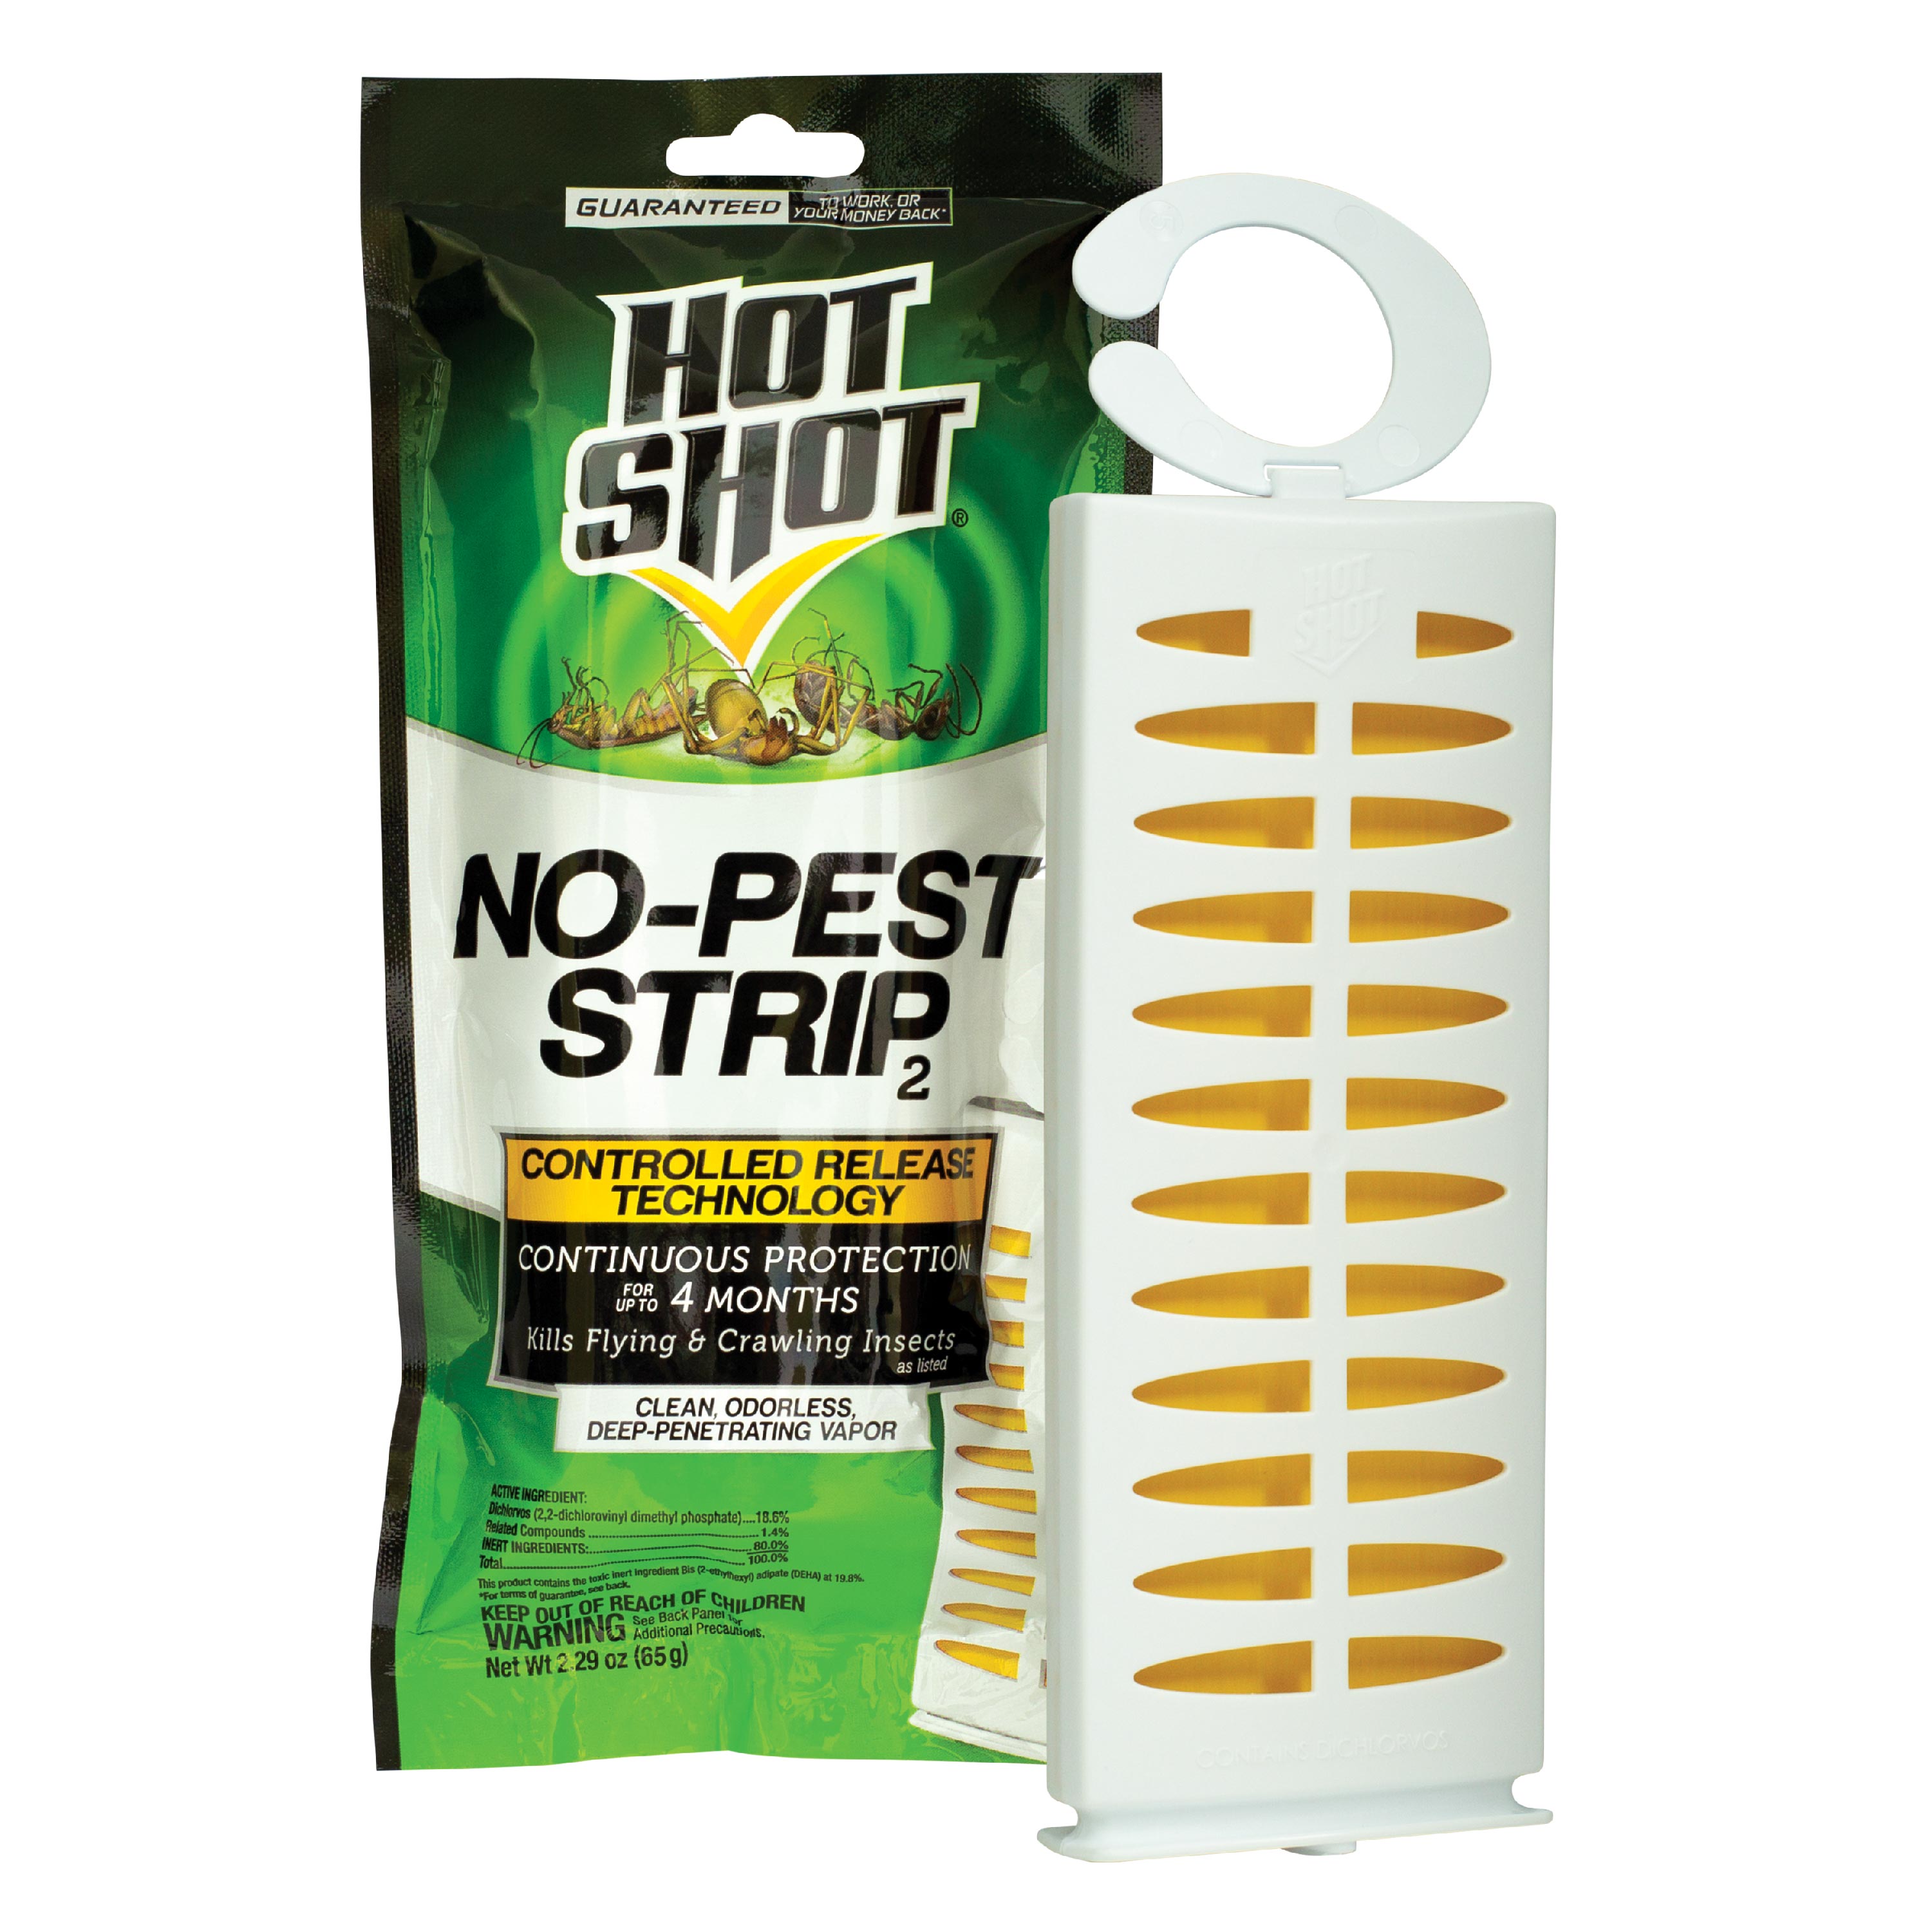 Window Fly Catcher - Includes 12 Strips - Nott Products, Inc